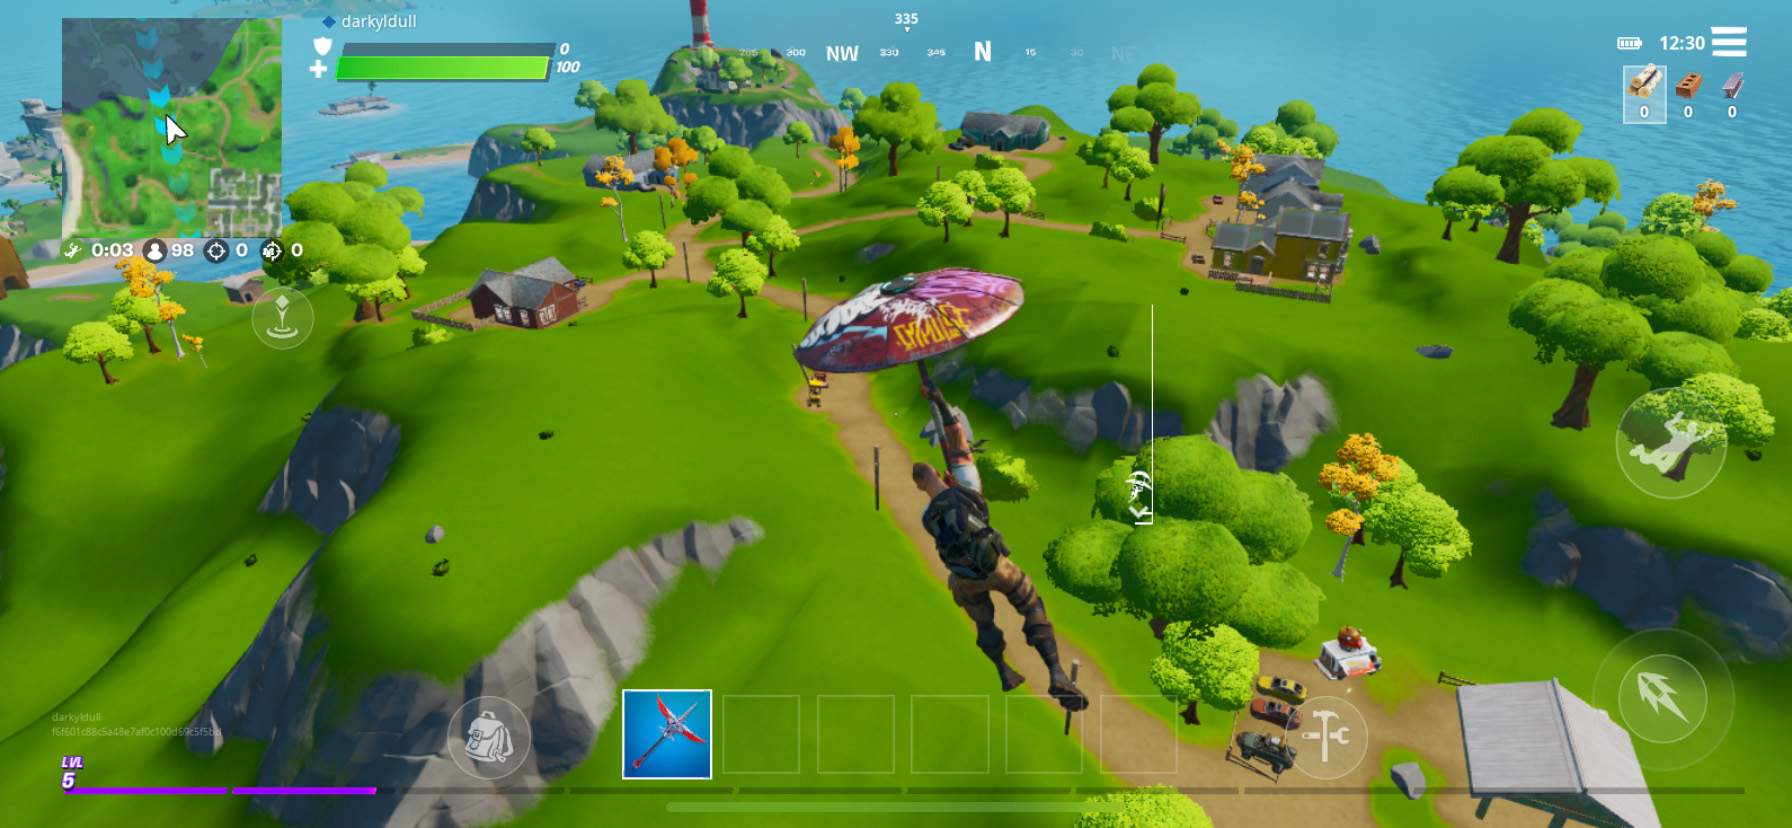 Fortnite Mobile for Android – Tips and Tricks for Staying Alive and Outplaying Your Enemies